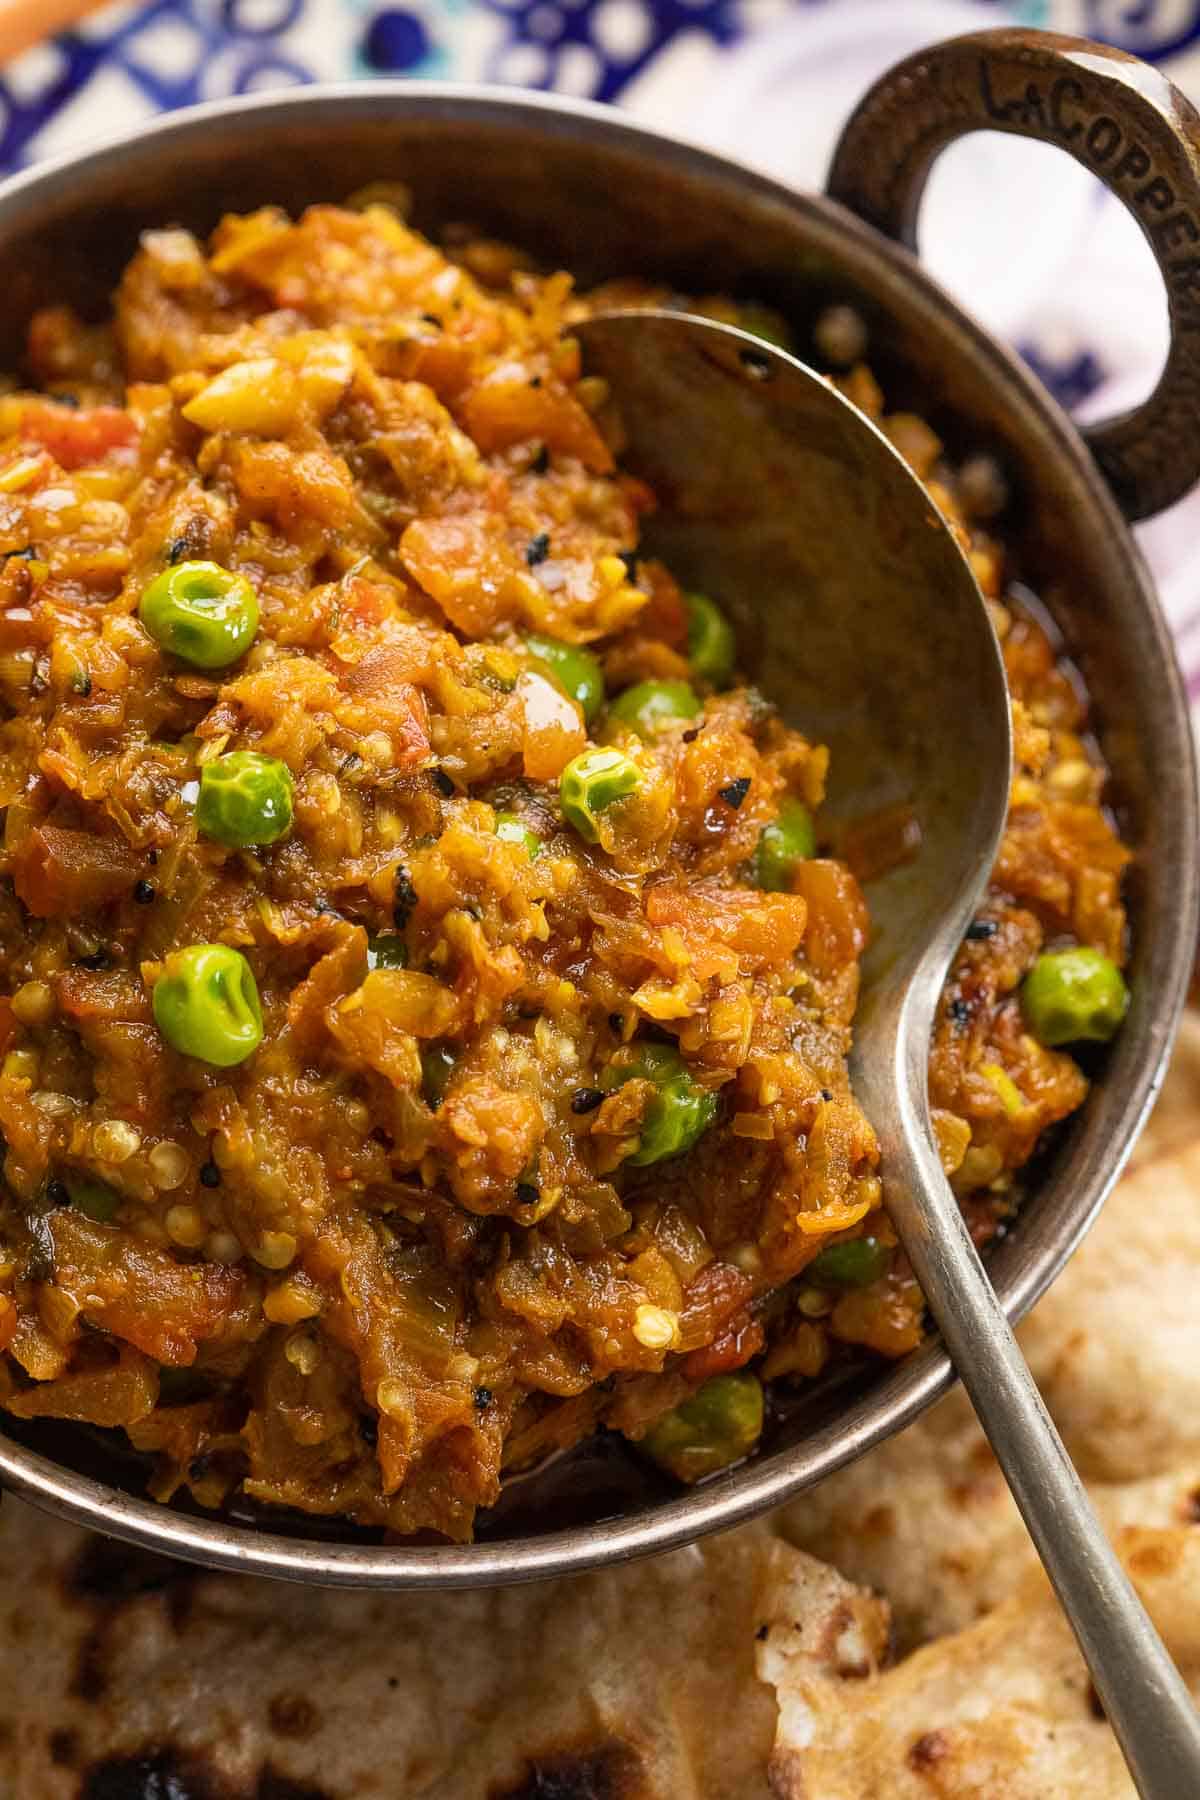 Baingan Bharta served in a copped kadhai with tandoori roti and sliced onions on the side